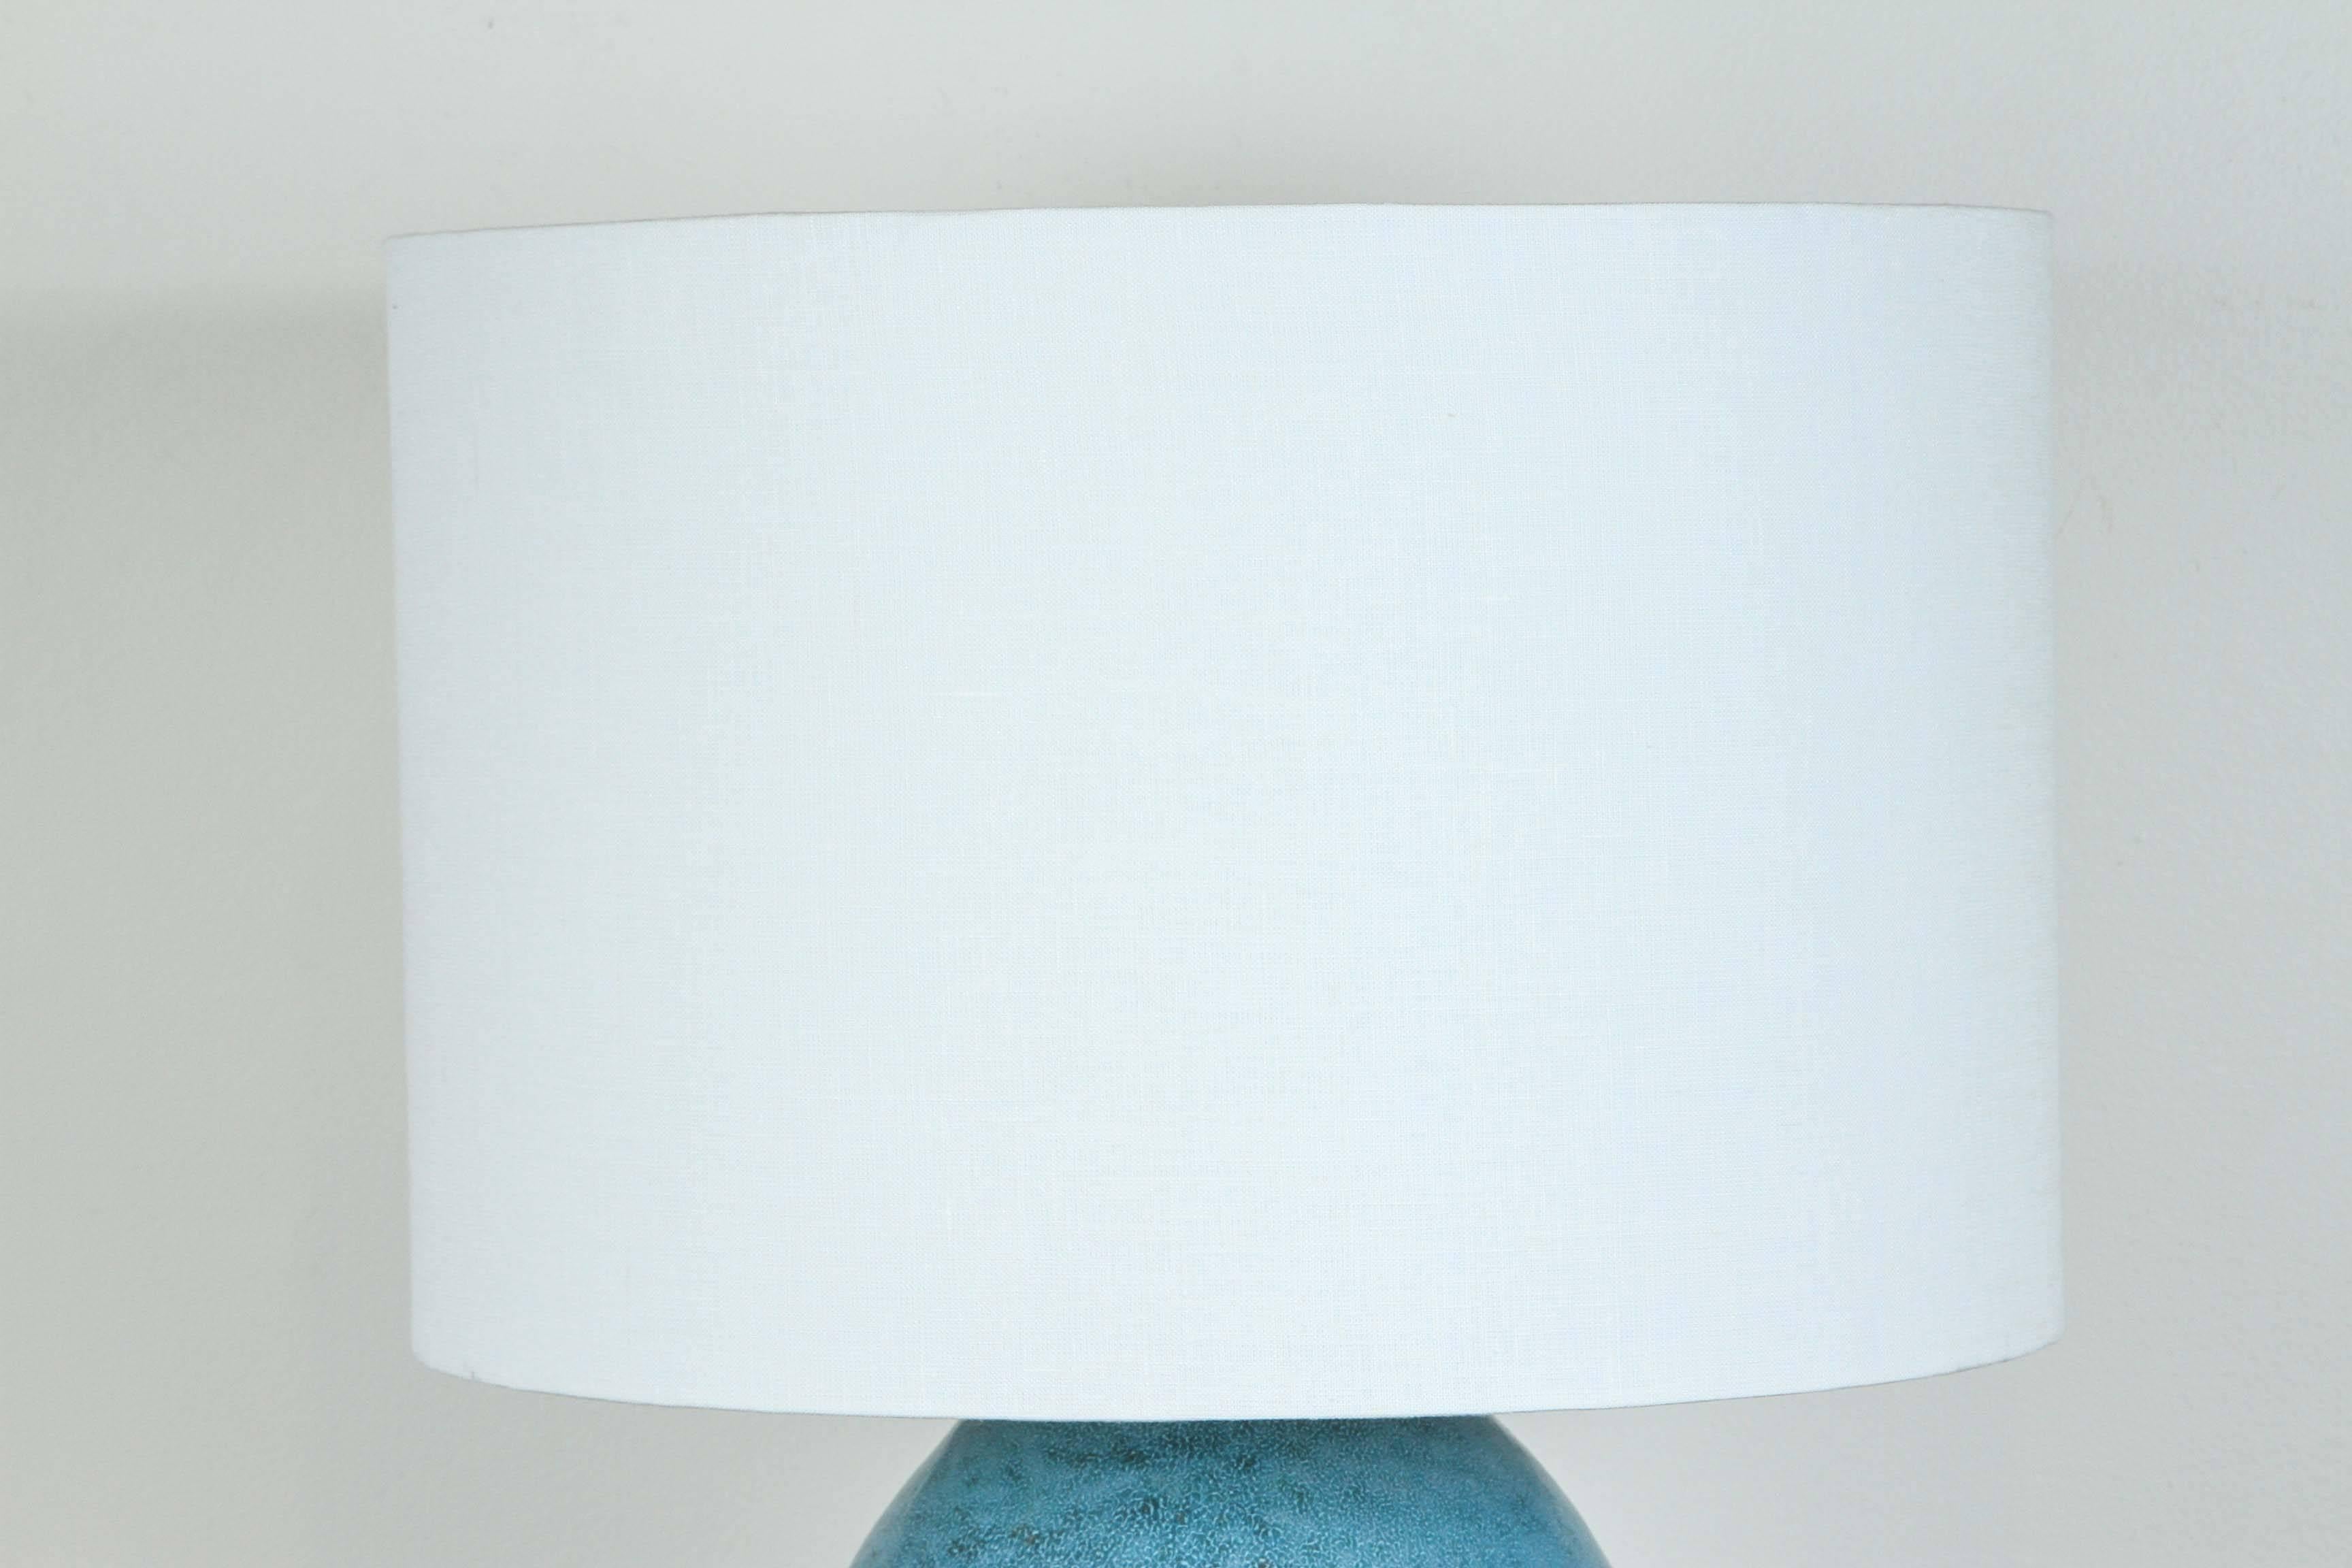 Extra large ceramic pod lamp in turquoise by Victoria Morris.